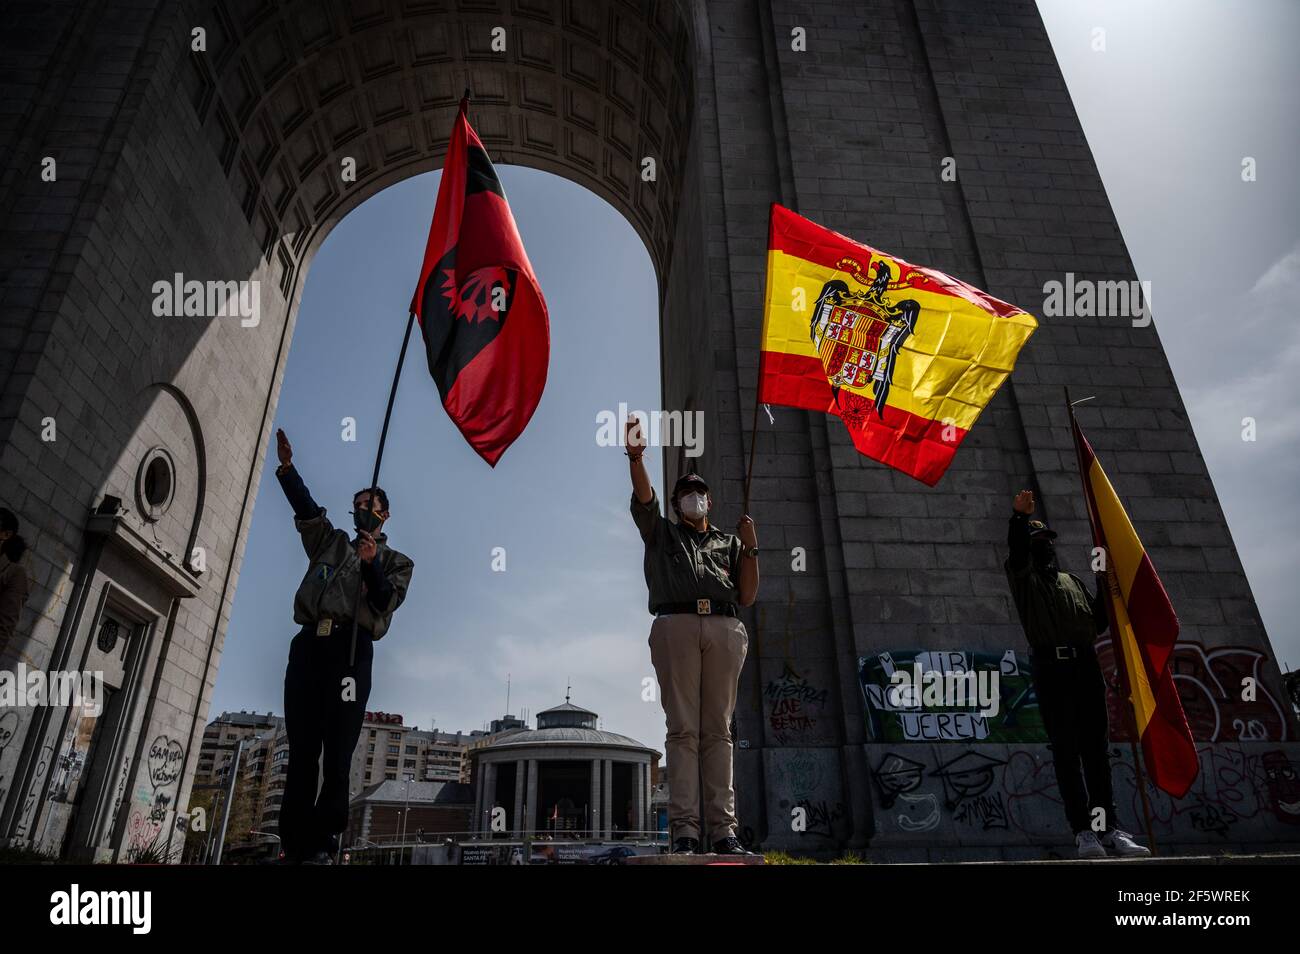 Madrid, Spain. 28th Mar, 2021. Supporters of Franco dictator doing the fascist salute holding pre-constitutional Spanish flags during a gathering of far right wing supporters at Arco de la Victoria, commemorating the 82nd anniversary when dictator Francisco Franco and his forces entered Madrid following the Spanish Coup of July 1936 against the 2nd Spanish Republic. Credit: Marcos del Mazo/Alamy Live News Stock Photo